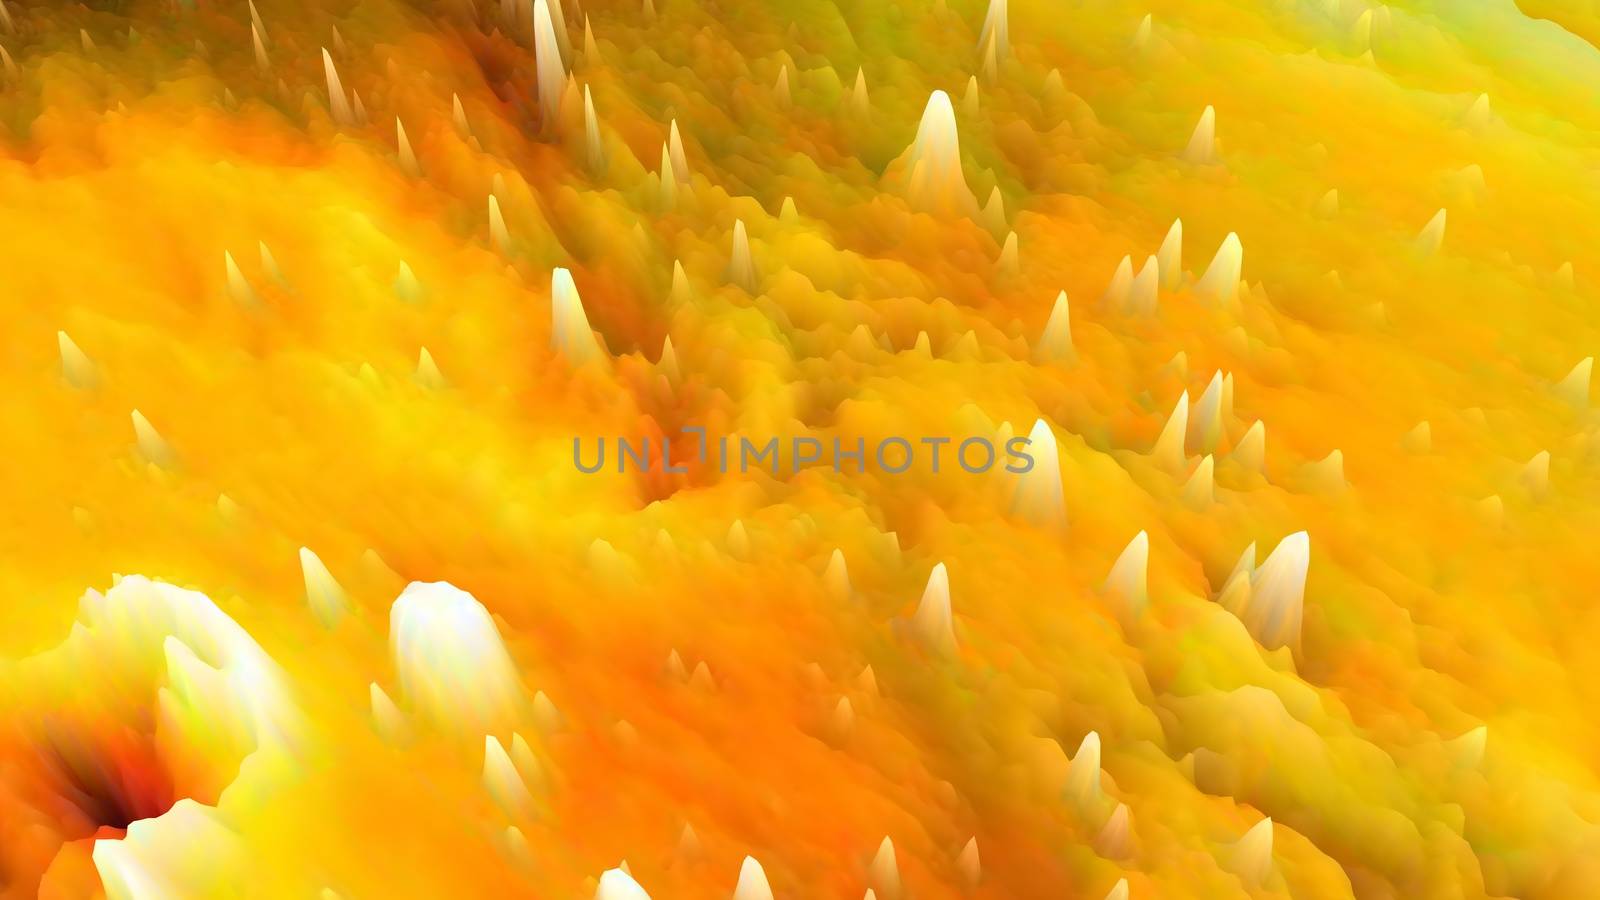 An elegant bright colored abstract background that can be used as a background by Photochowk